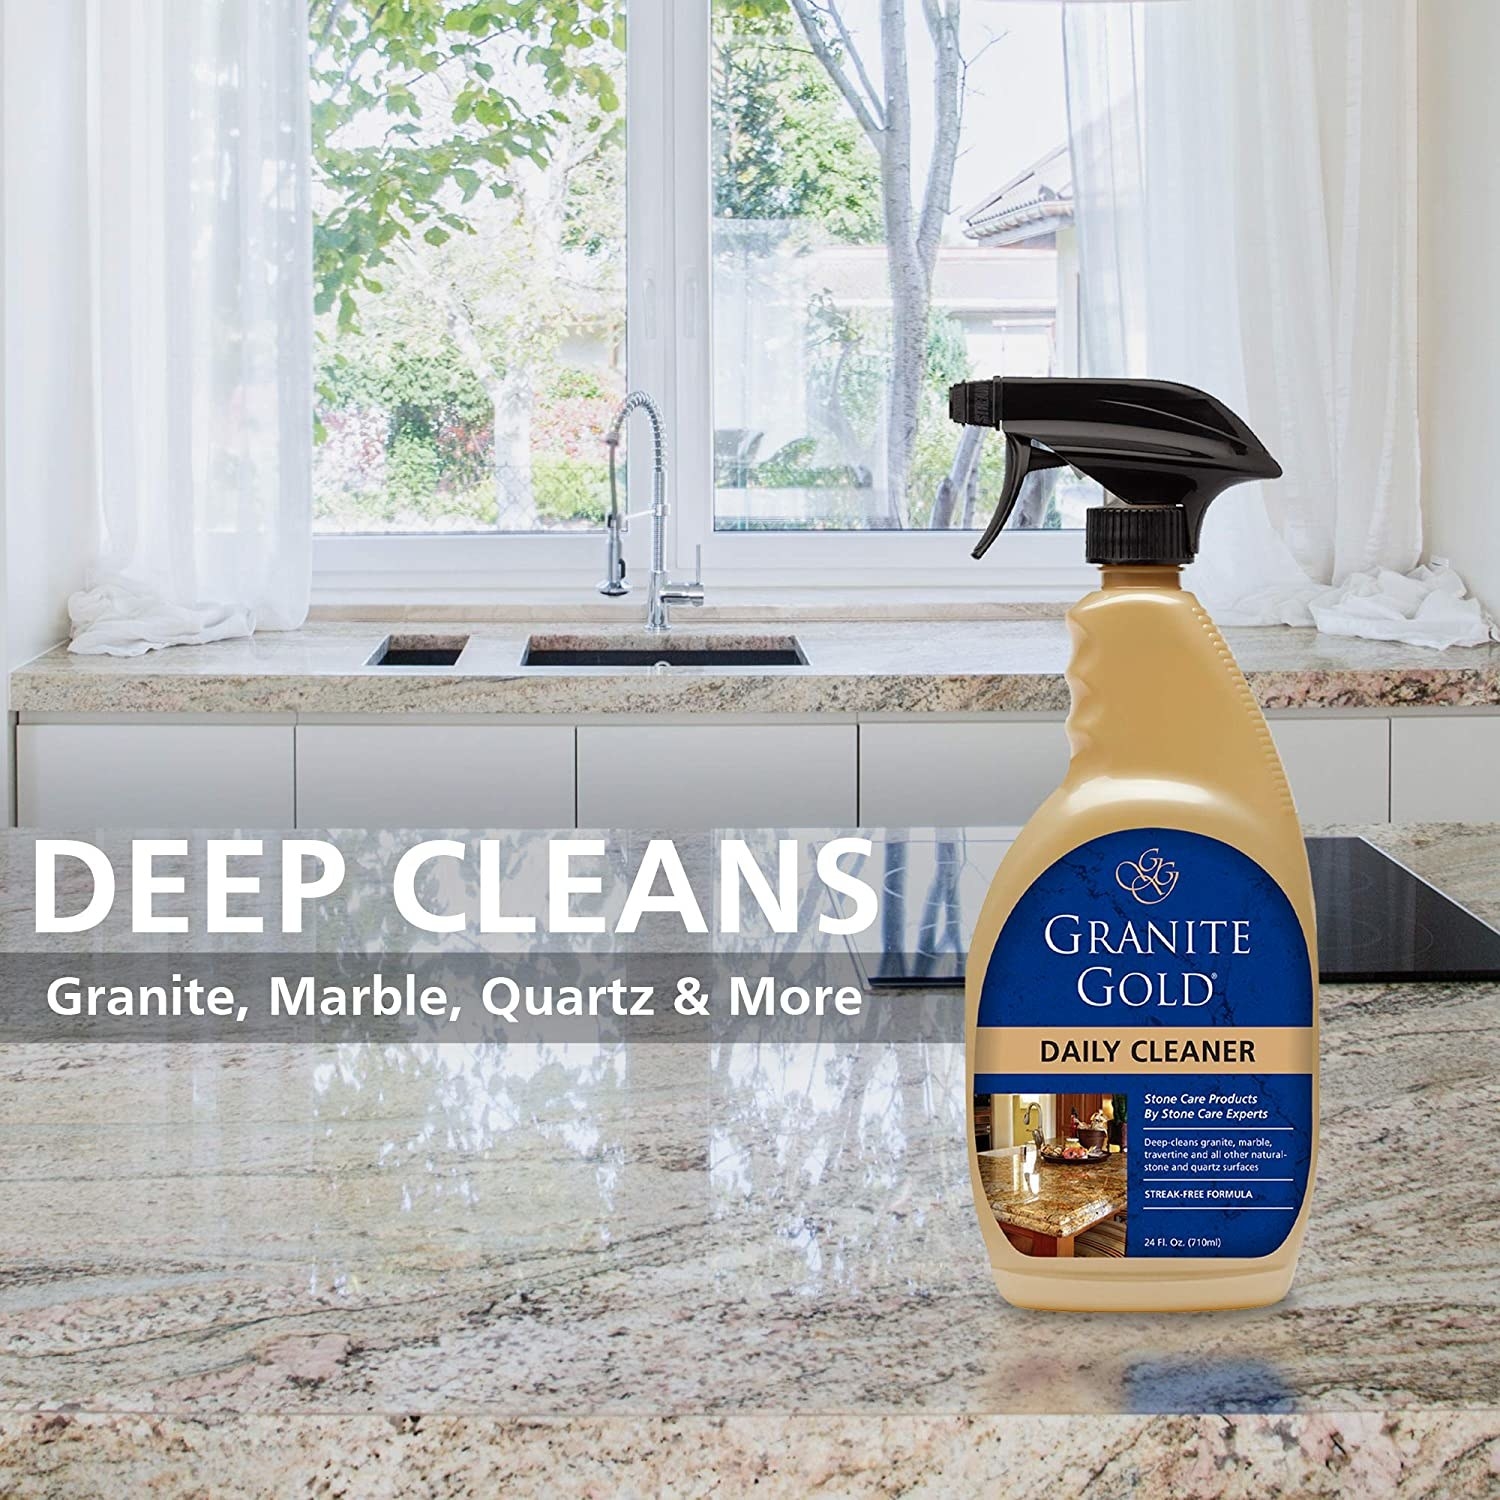 The spray bottle of Granite Gold Daily Cleaner sitting on a counter